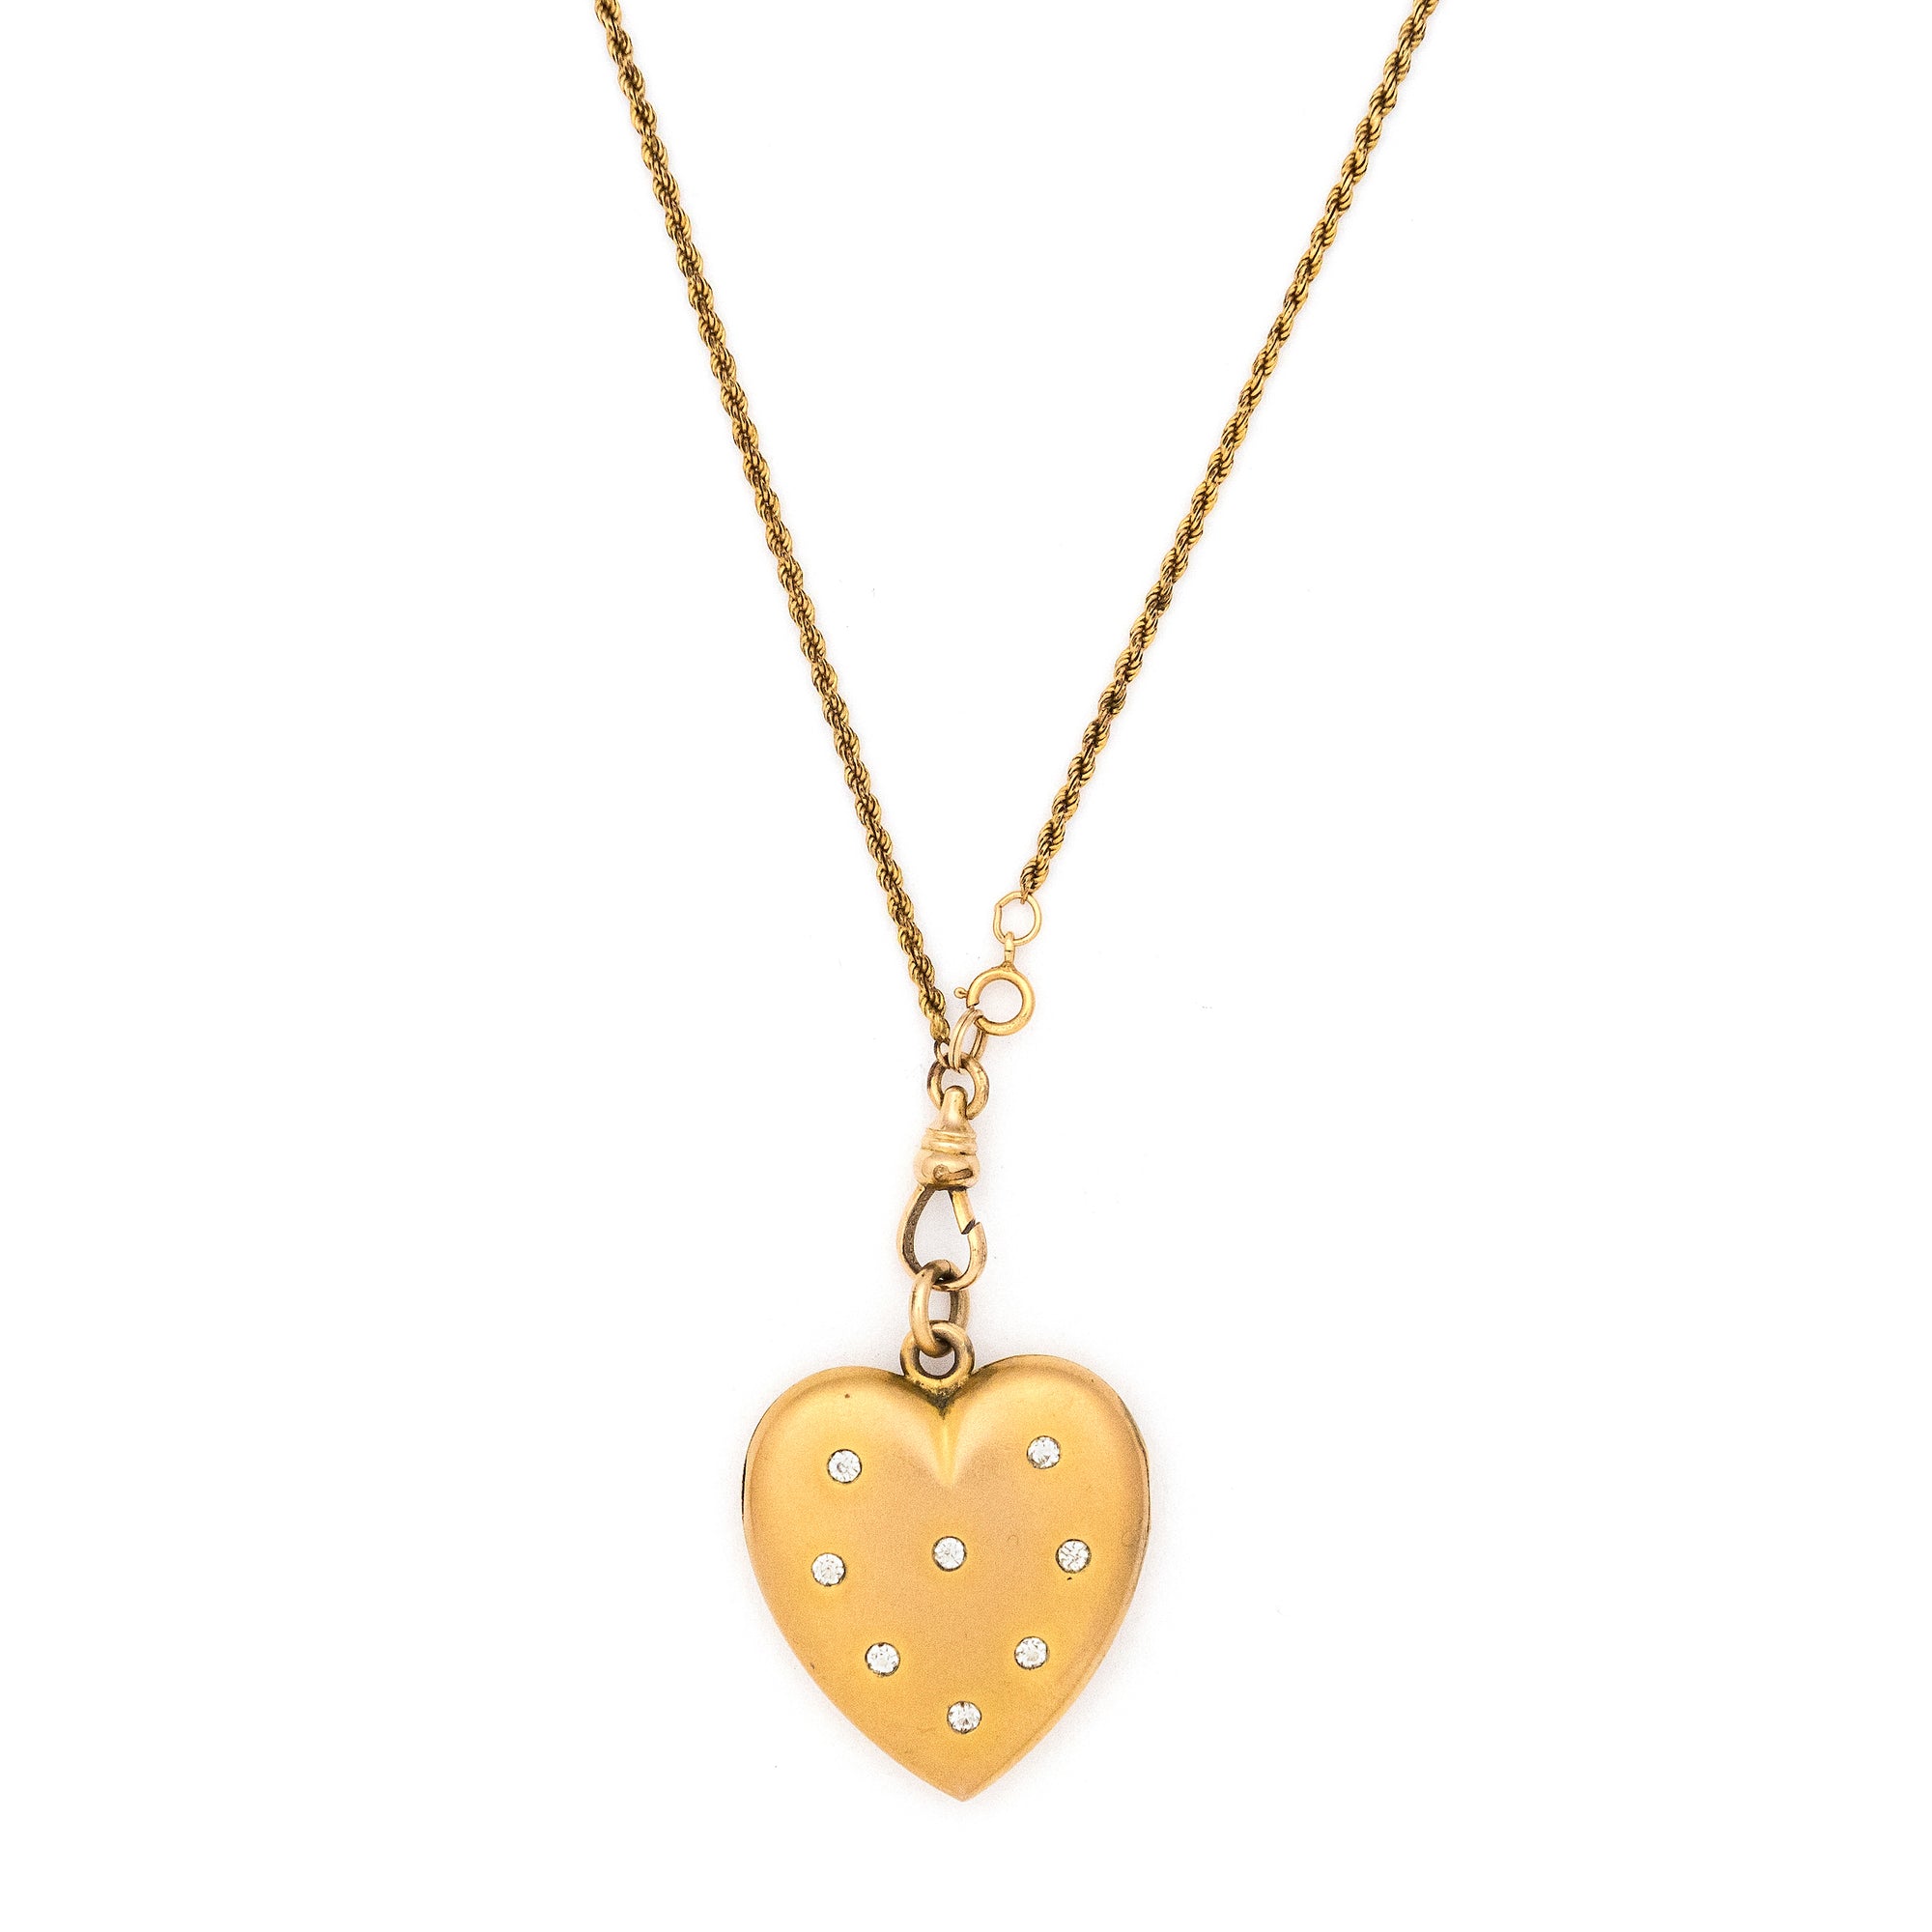 Matte Twinkle Heart Antique Locket, gold fill with white paste stones, perfect for holding pictures and photographs, front view